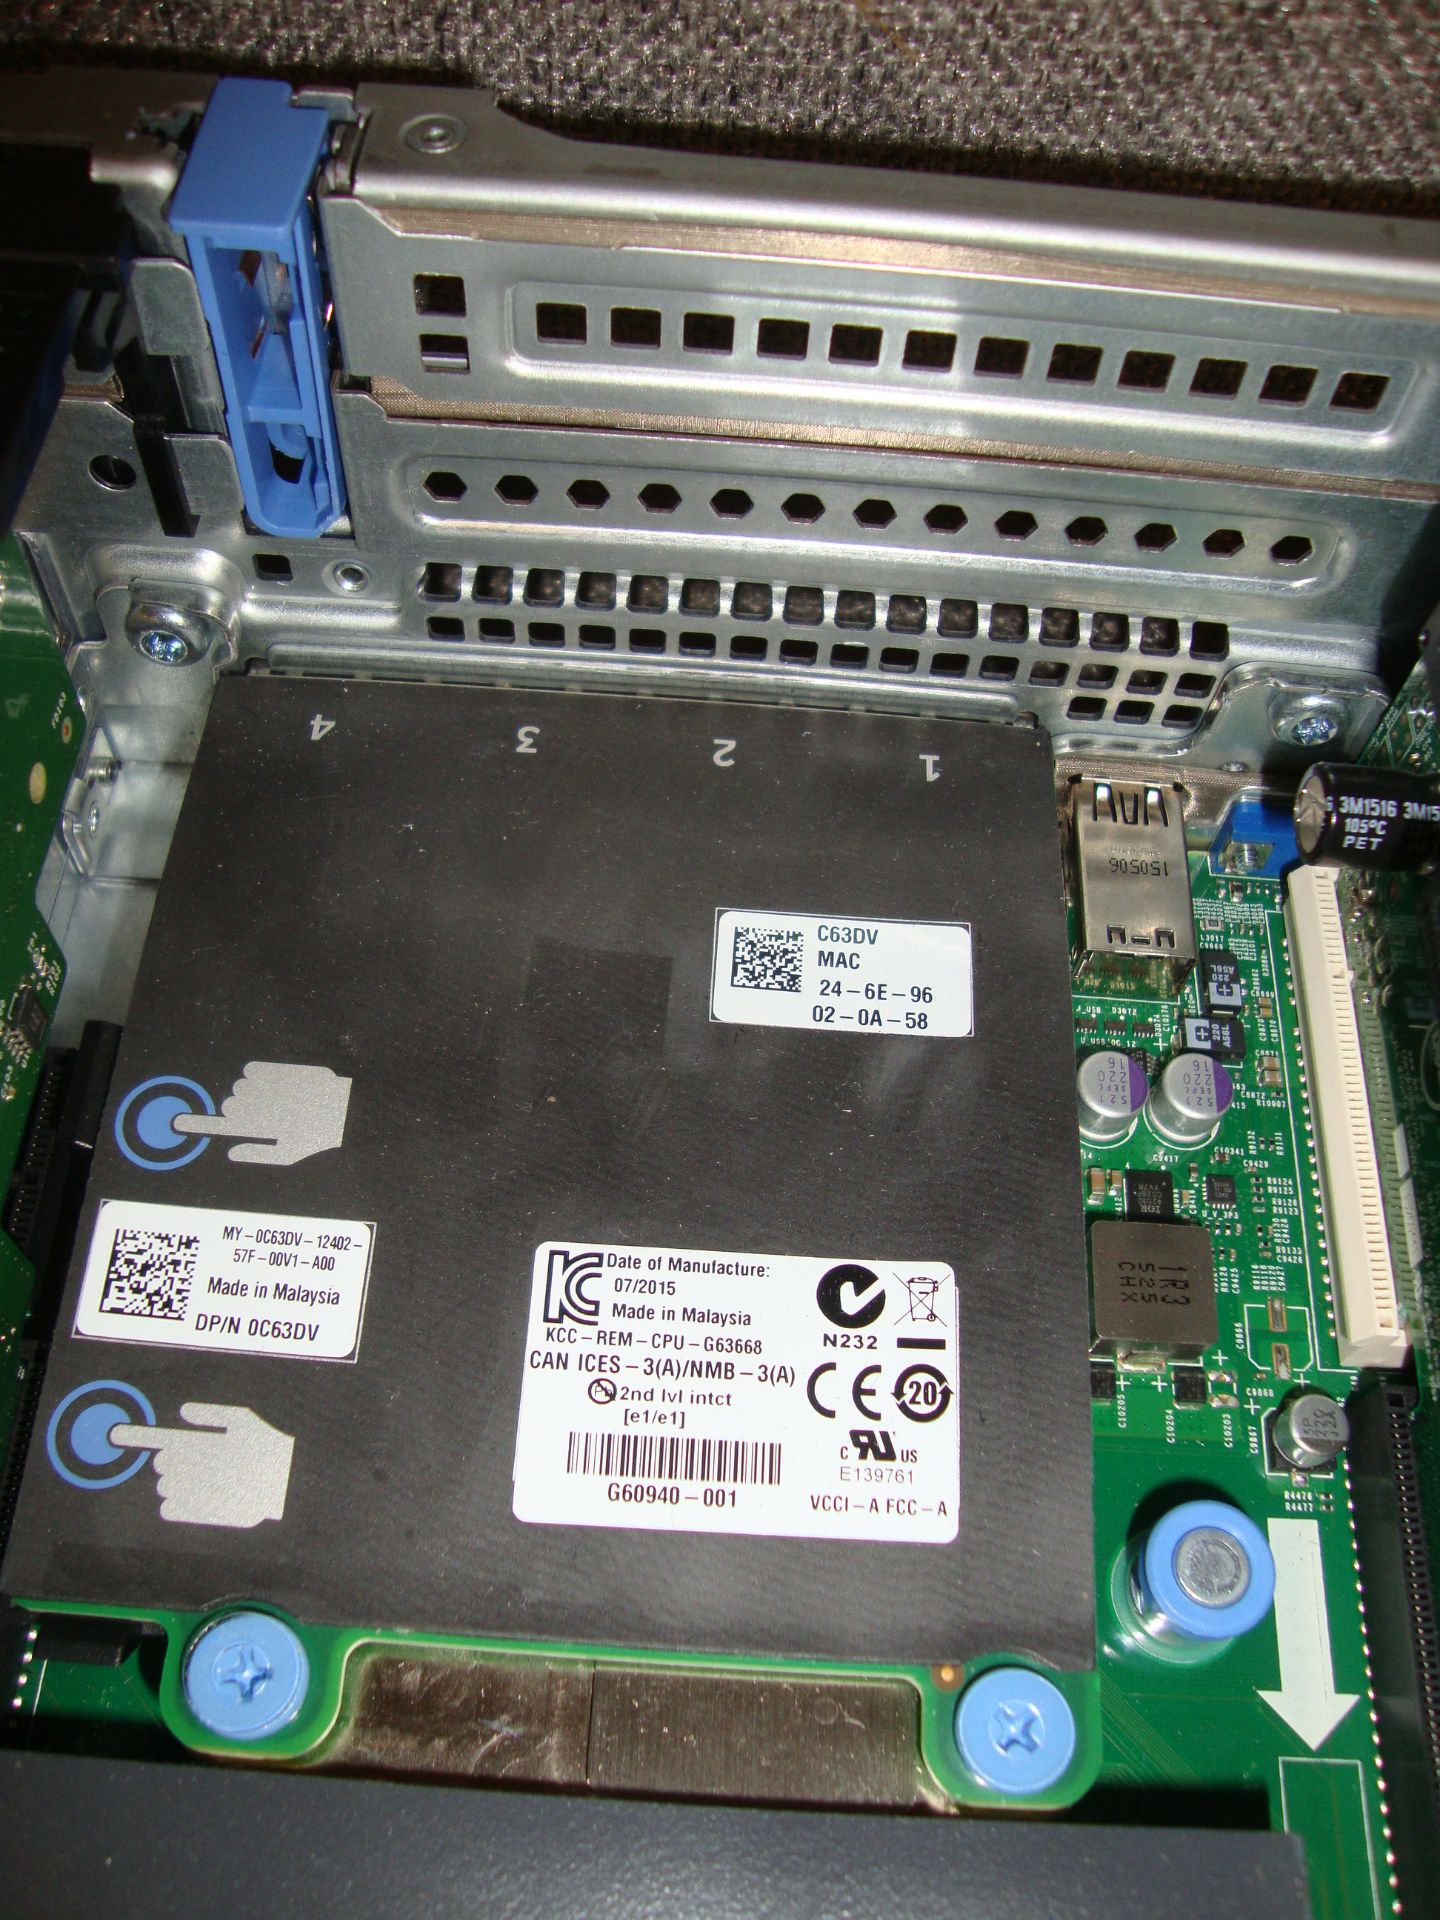 Dell PowerEdge model R730 server with twin Xeon 6 Core E5-2609 V3 1.9 GHz processors, 96Gb RAM, - Image 9 of 13